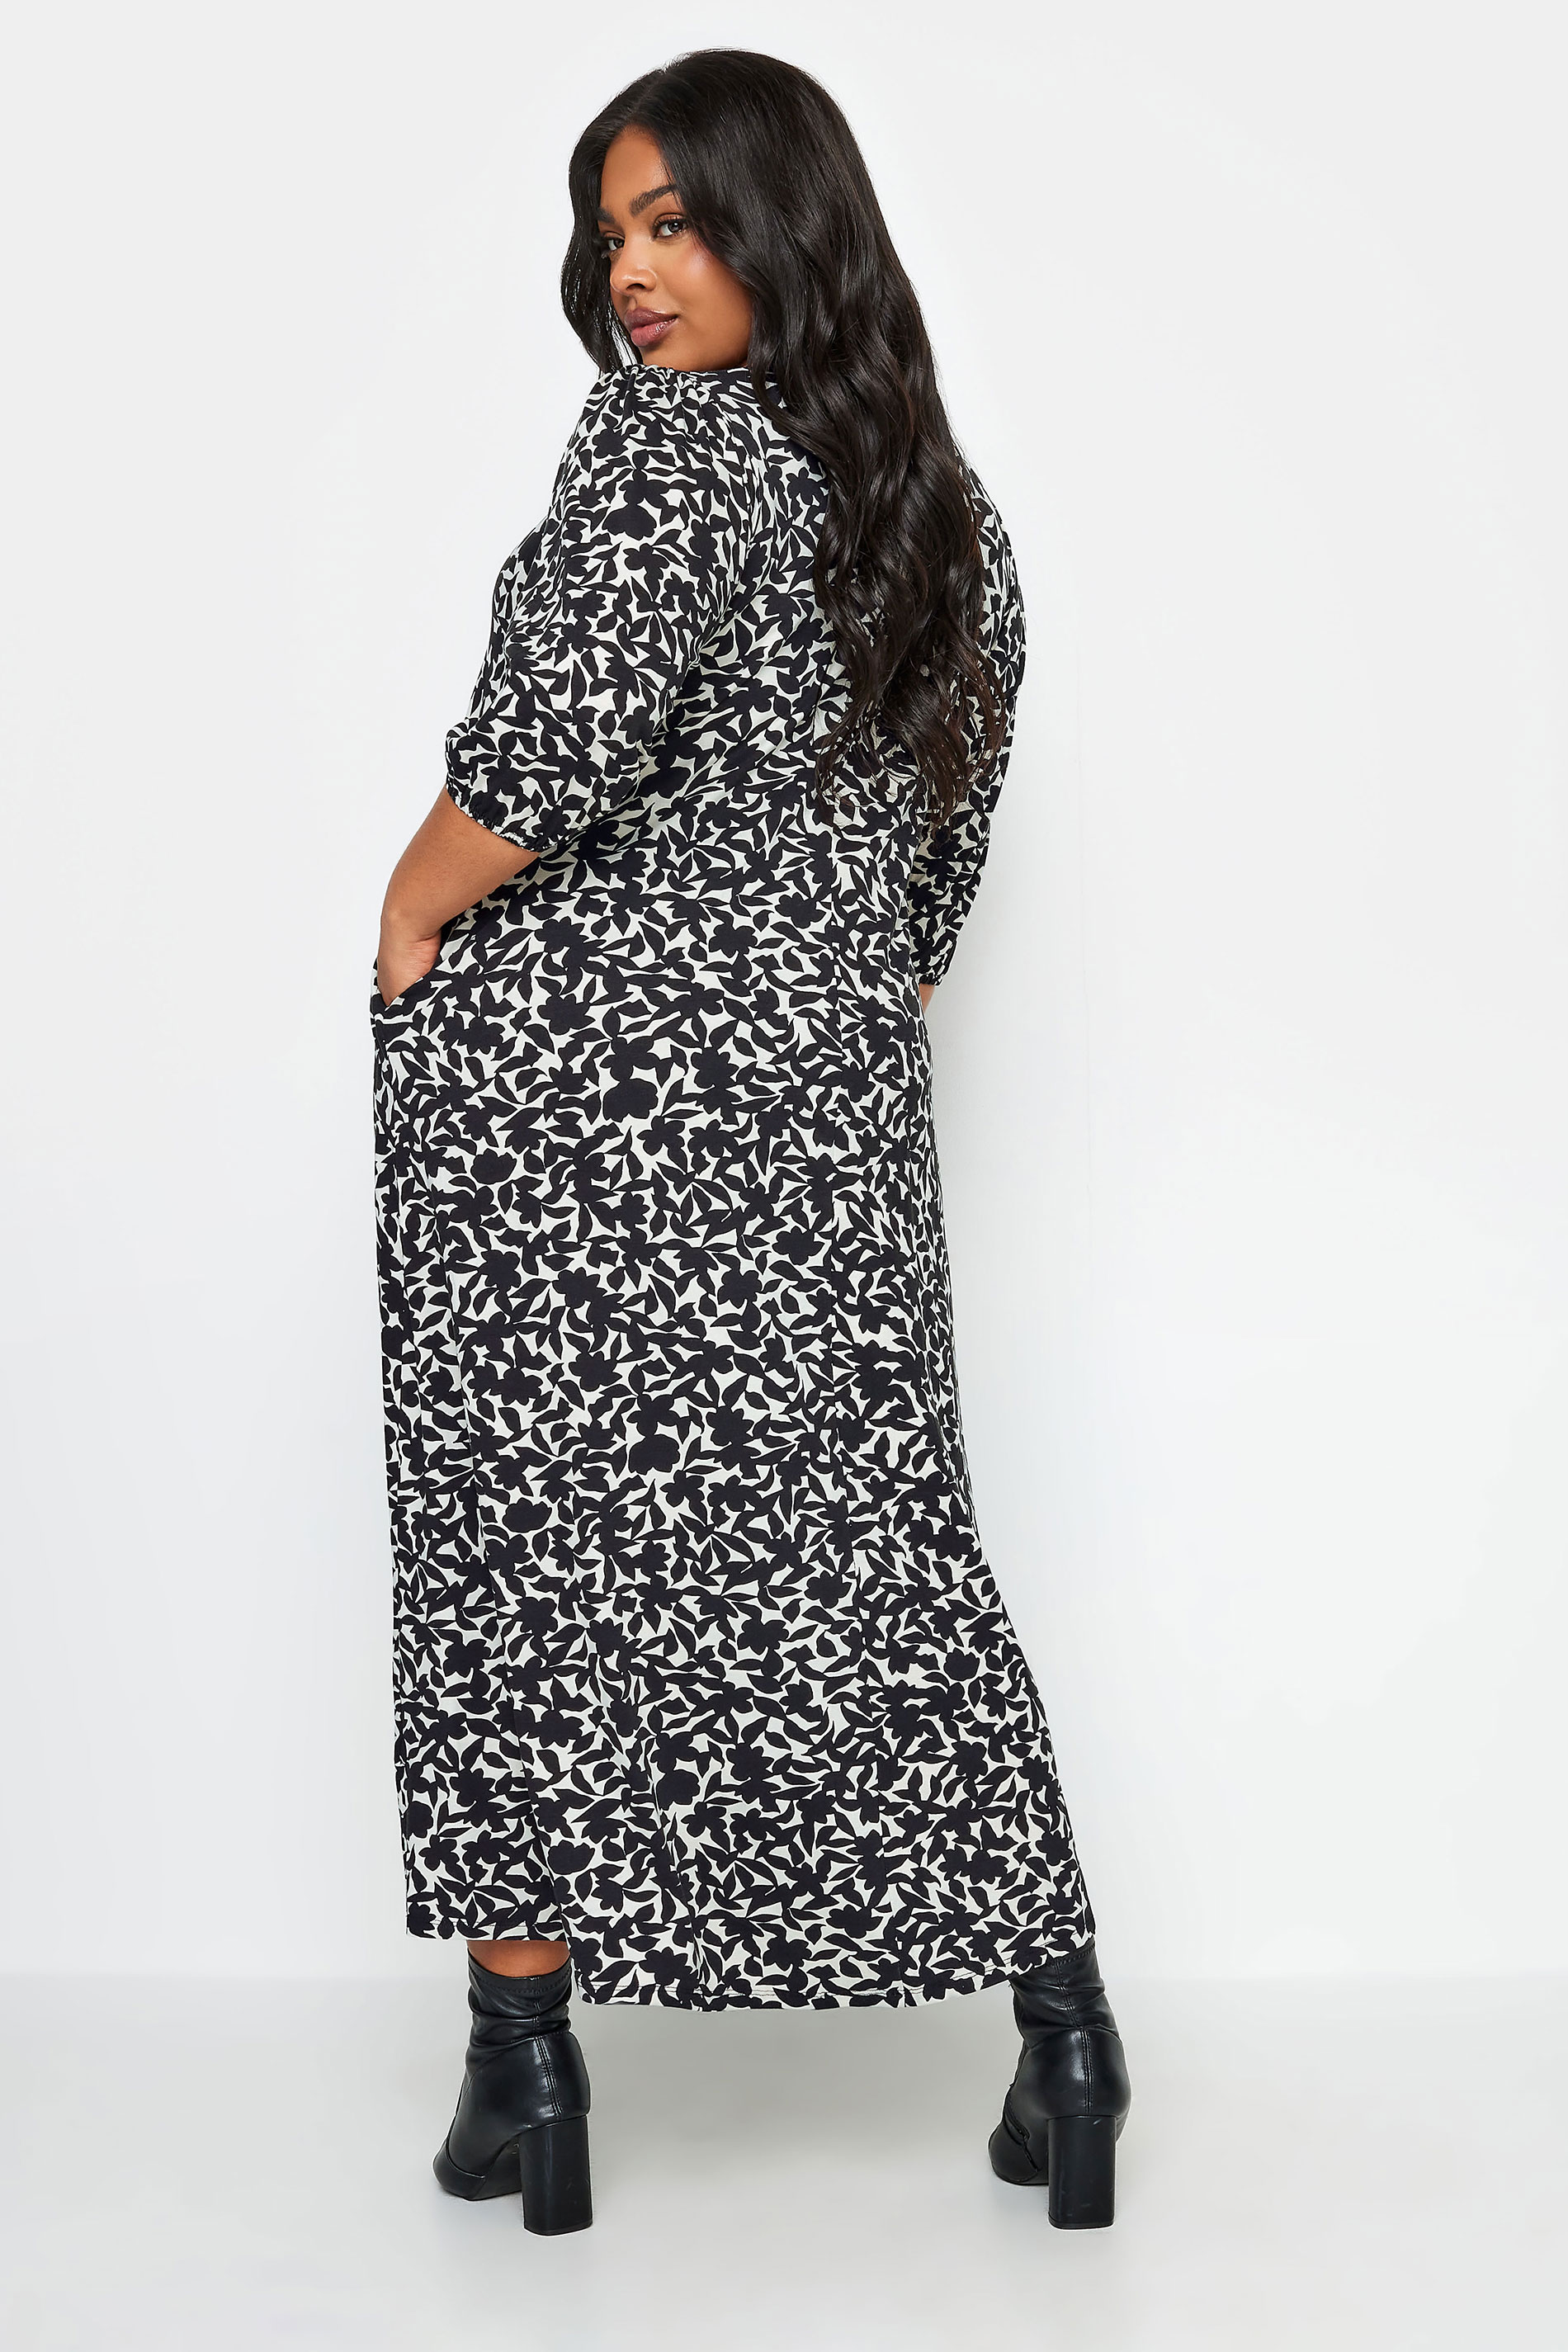 YOURS Plus Size Black & White Floral Print Swing Maxi Dress | Yours Clothing 3